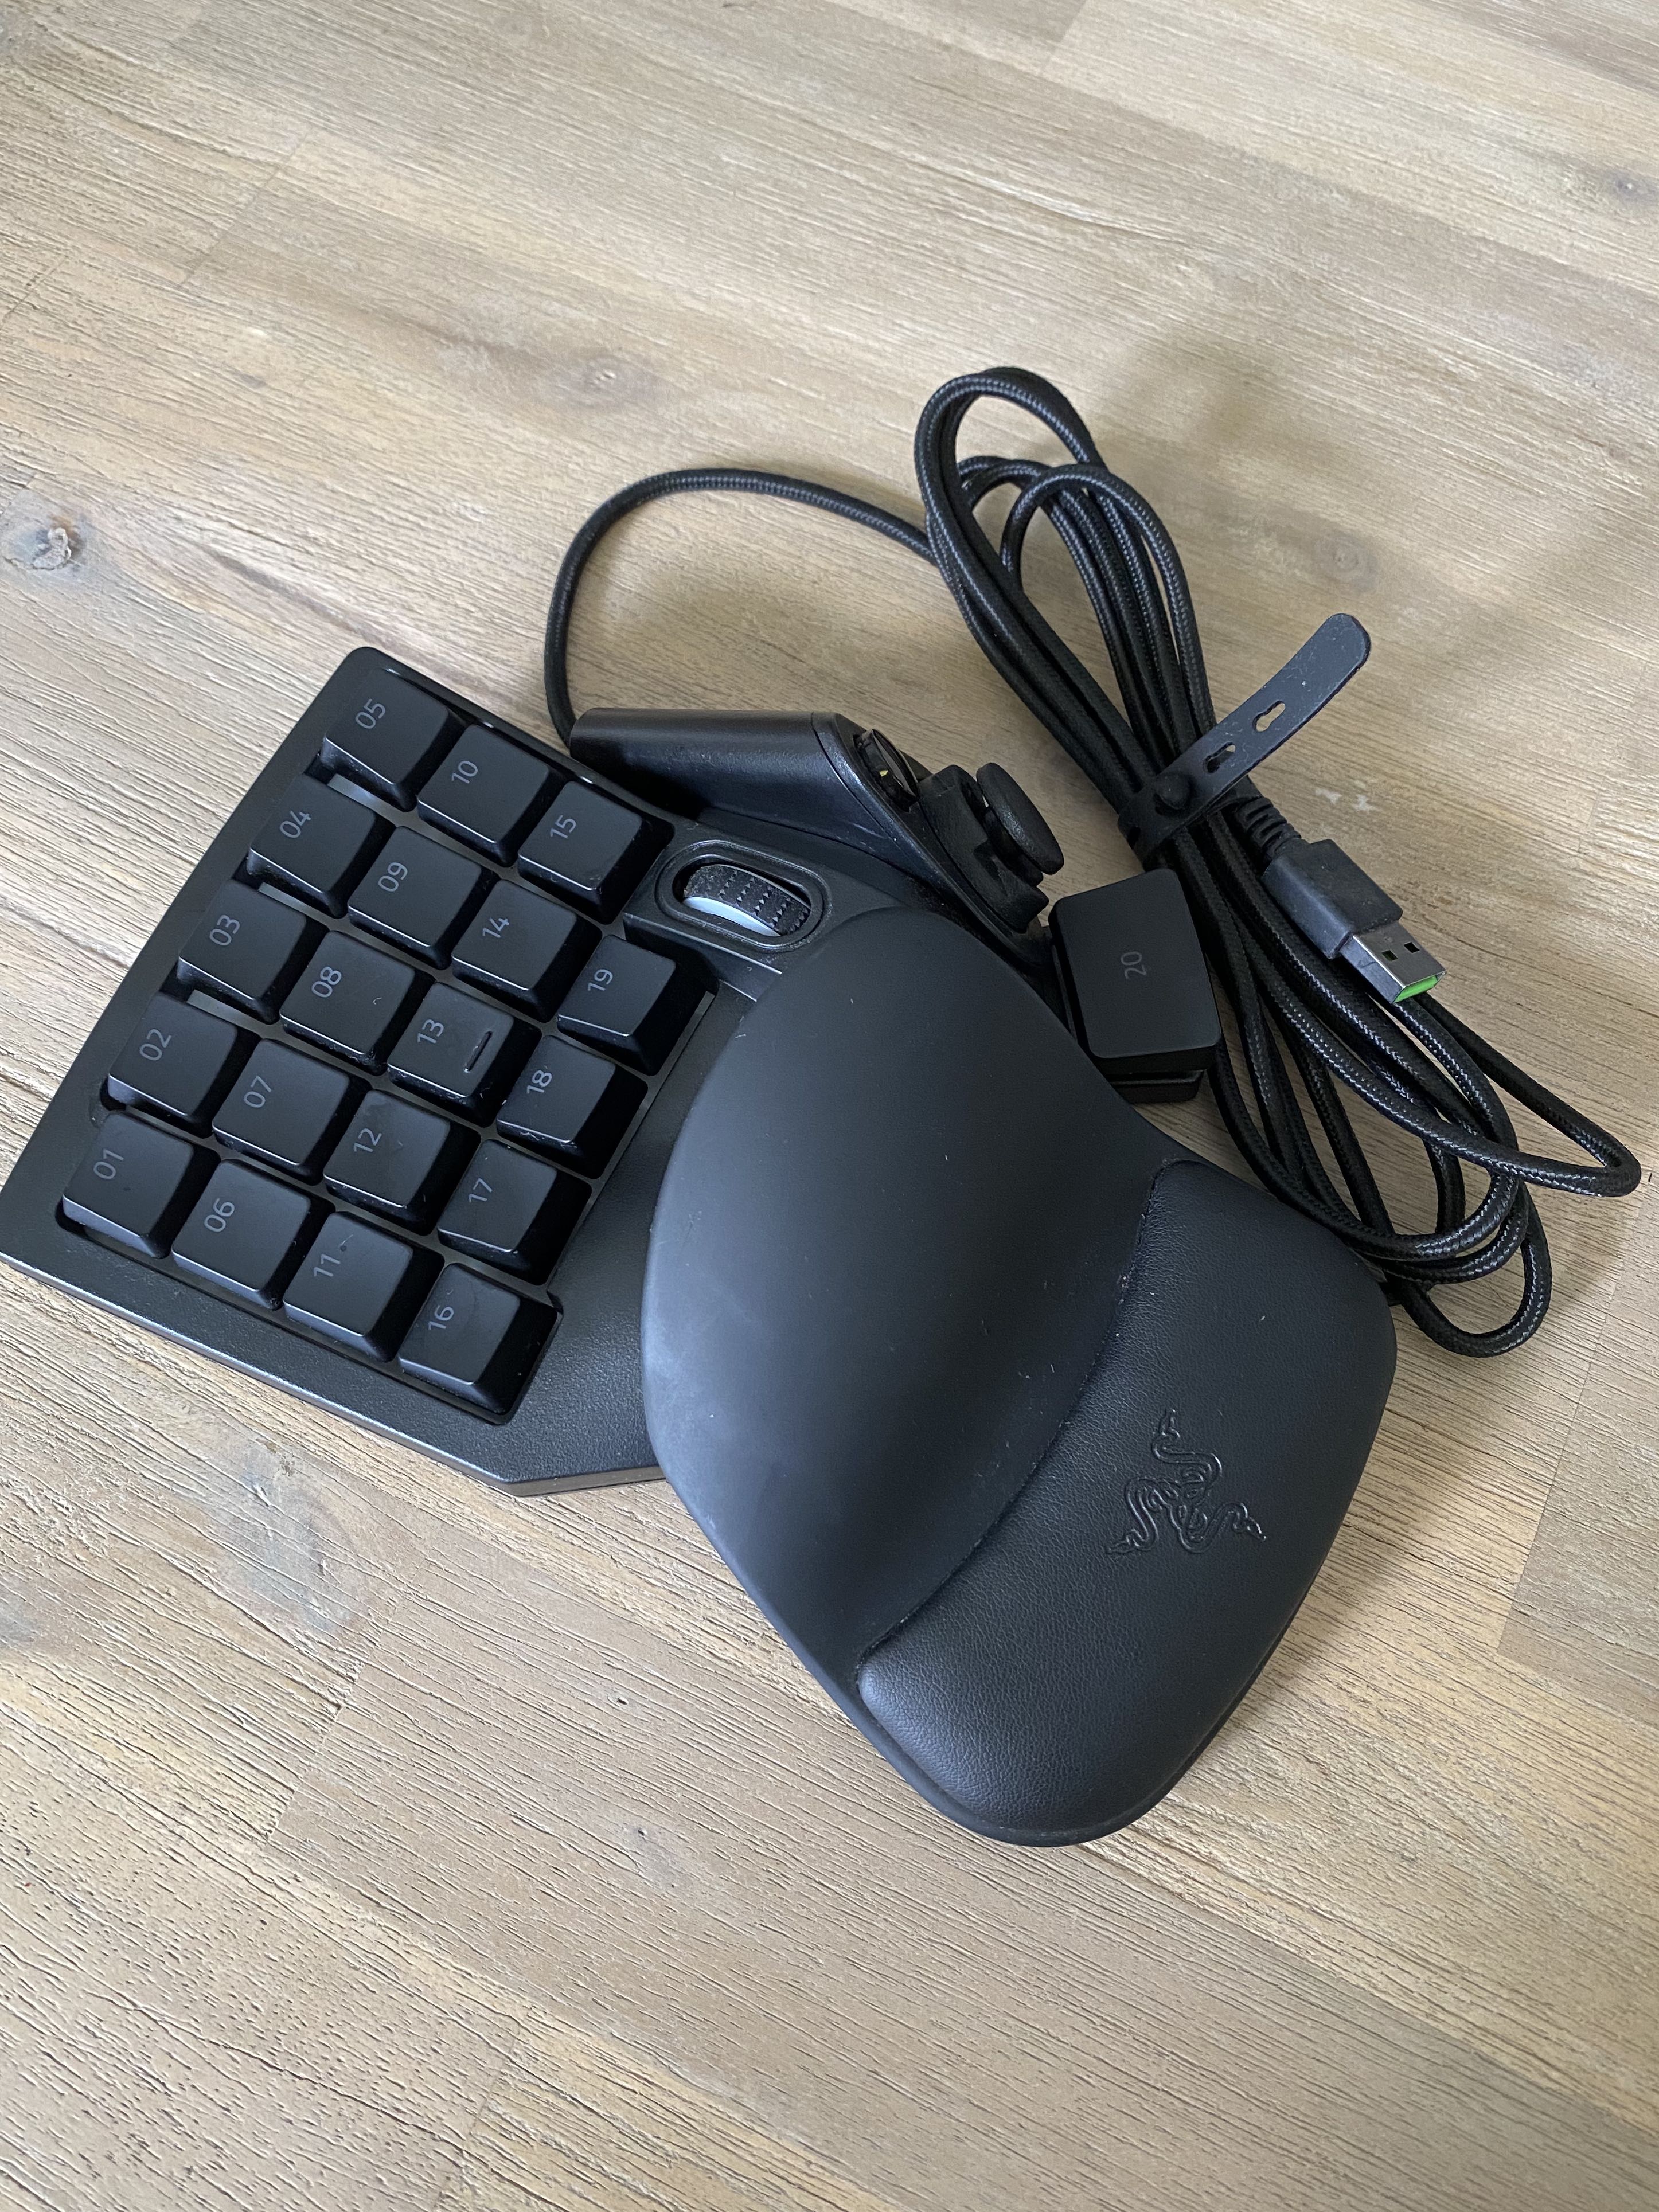 Like New Razer Tartarus V2 Gaming Keypad Keyboard Computers And Tech Parts And Accessories 7361